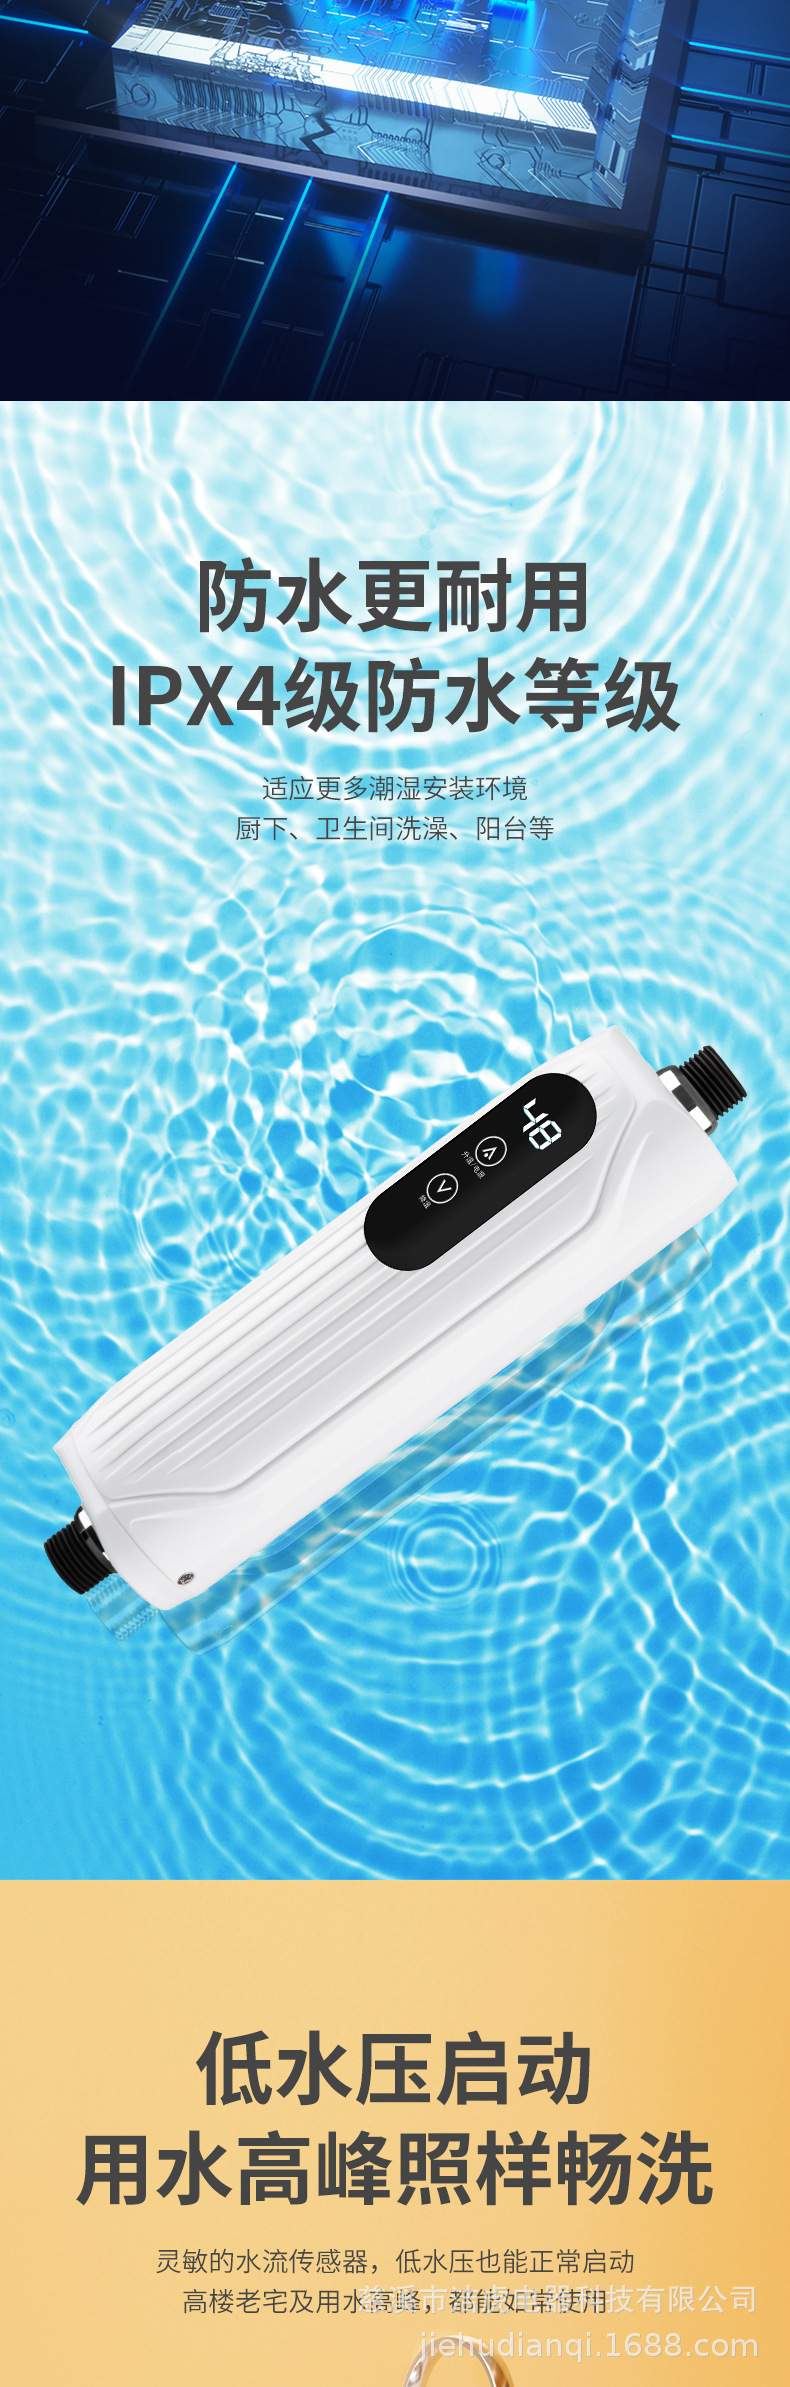 That Is, Thermal Electric Water Heater Shower Free Storage Speed Thermoelectric Faucet Dual Use Kitchen Constant Temperature Kitchen Treasure